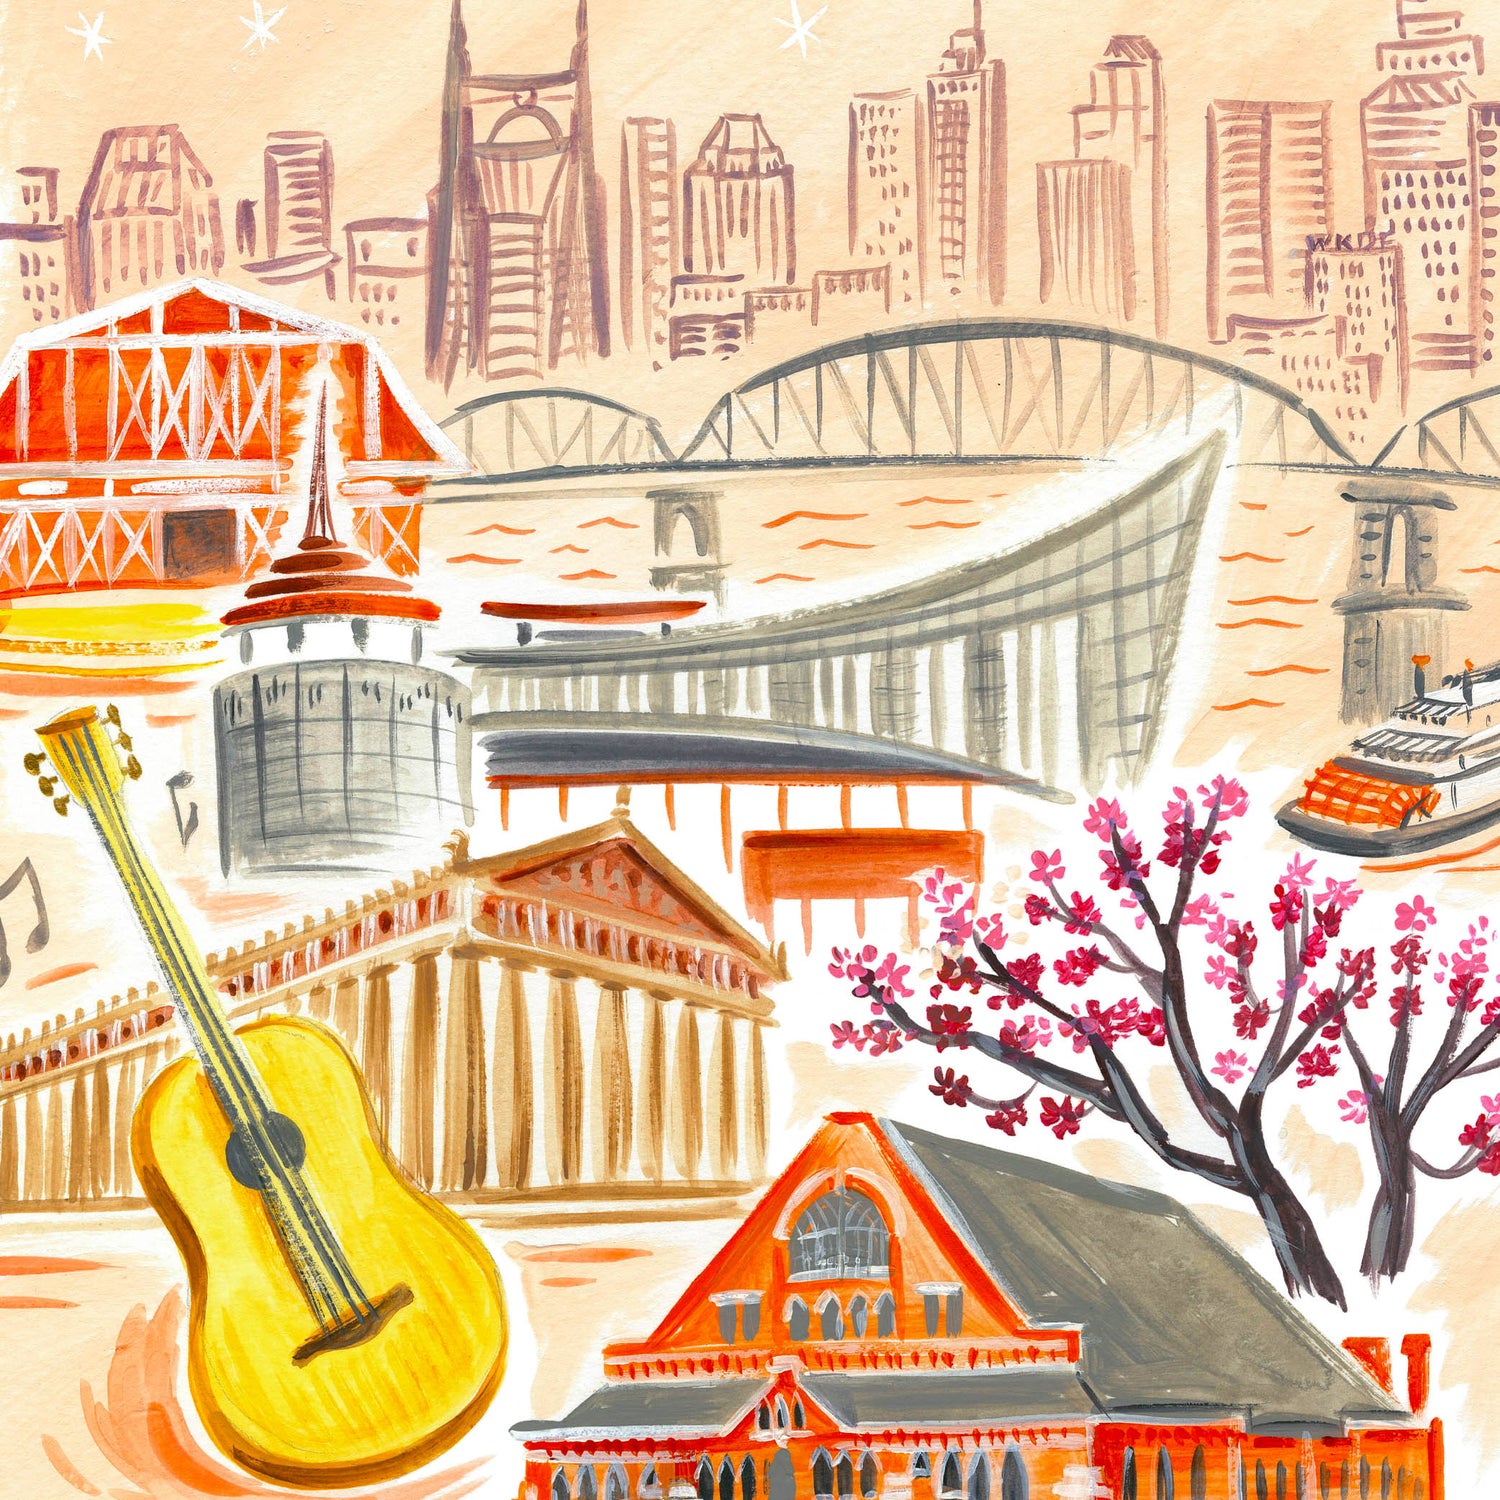 Downtown Nashville Skyline art detail with famous Music City landmarks in modern colors; illustration by Angela Staehling